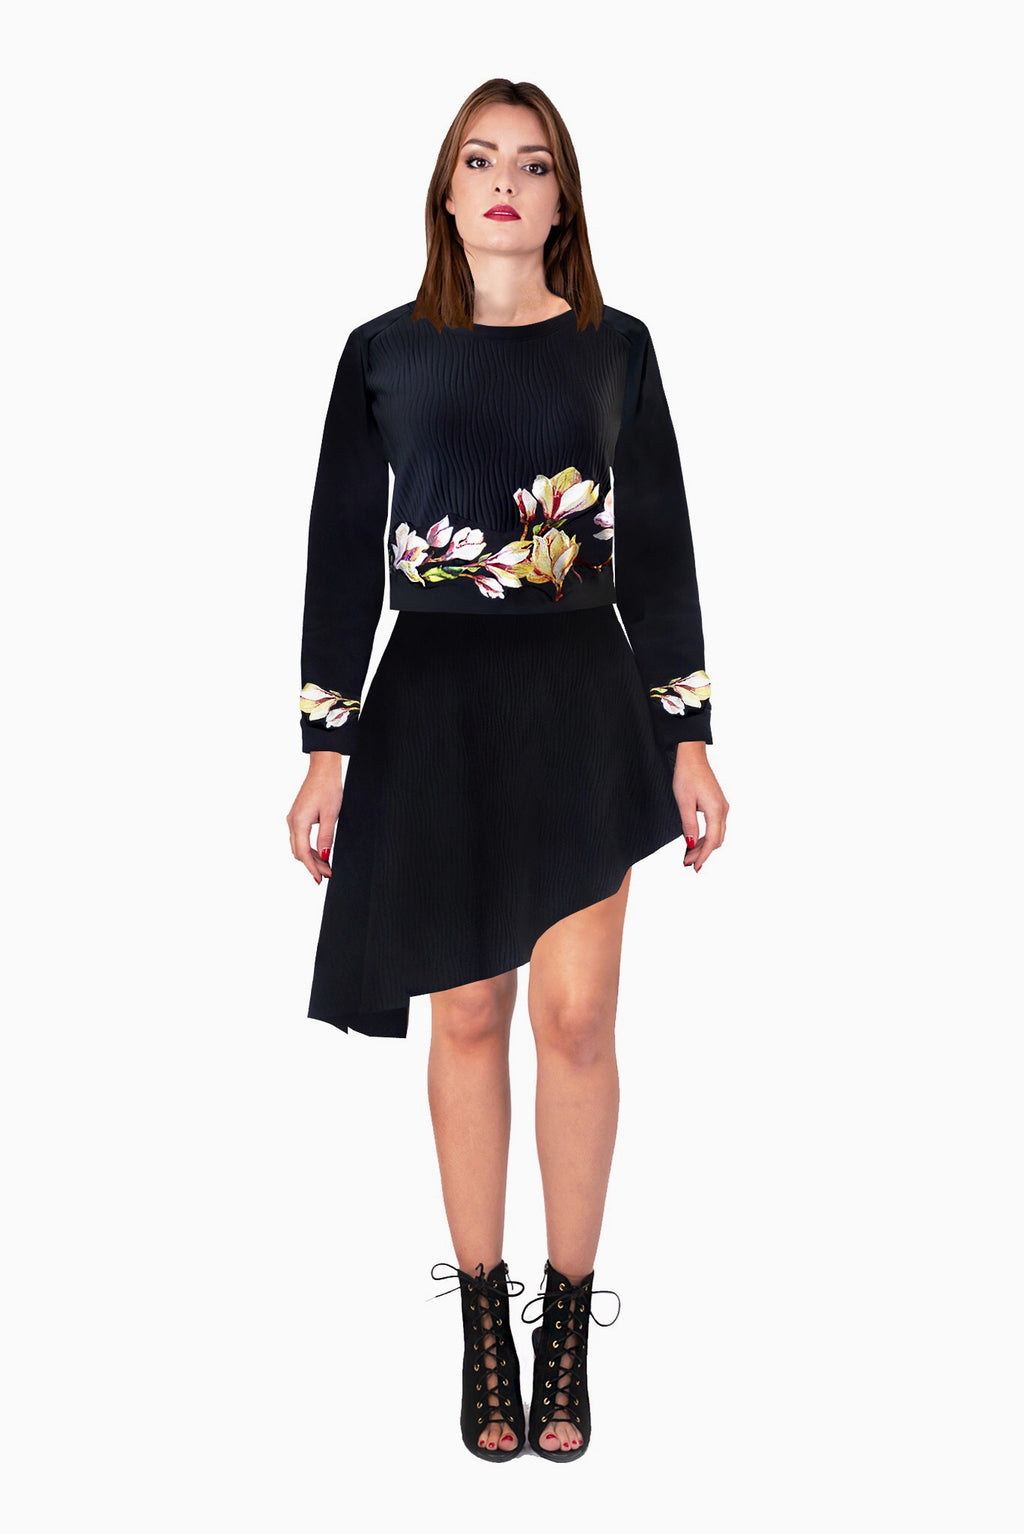 Cropped sweater with neoprene flowers